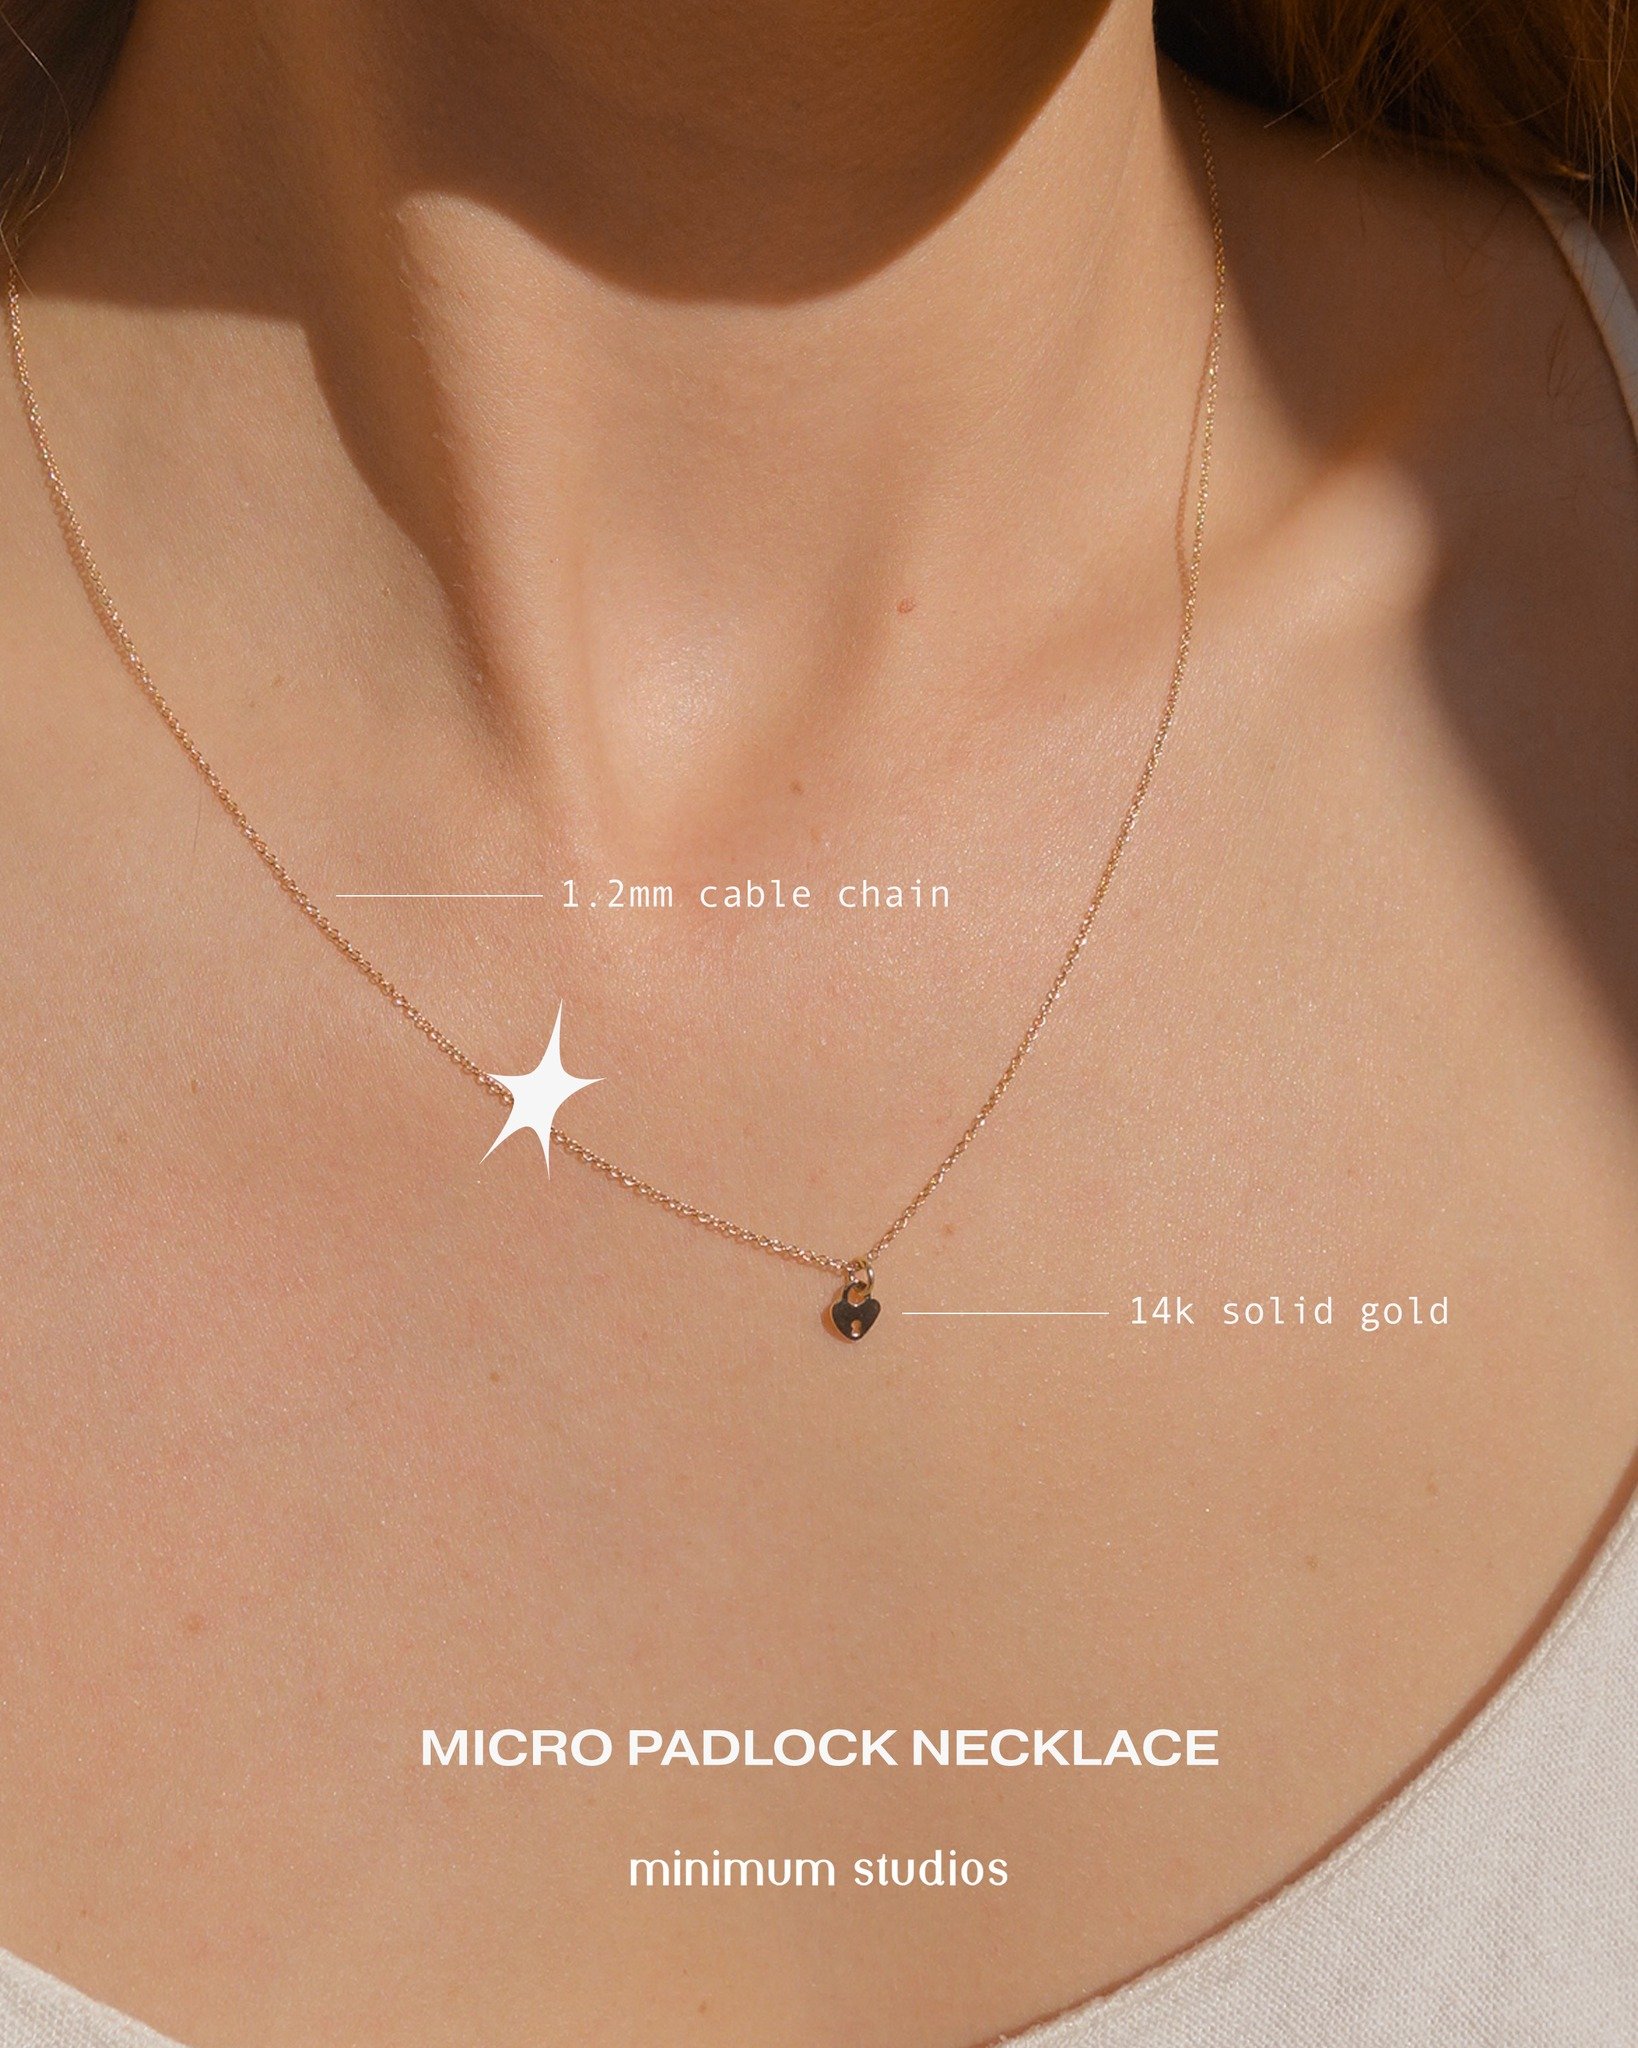 A teeny, tiny new addition to our online range, the Micro Padlock Necklace 💌  Crafted from 14k Solid Gold, this piece is designed to last a lifetime. 

Measuring just 5.1mm, the heart-shaped padlock charm has just enough weight to balance the super 